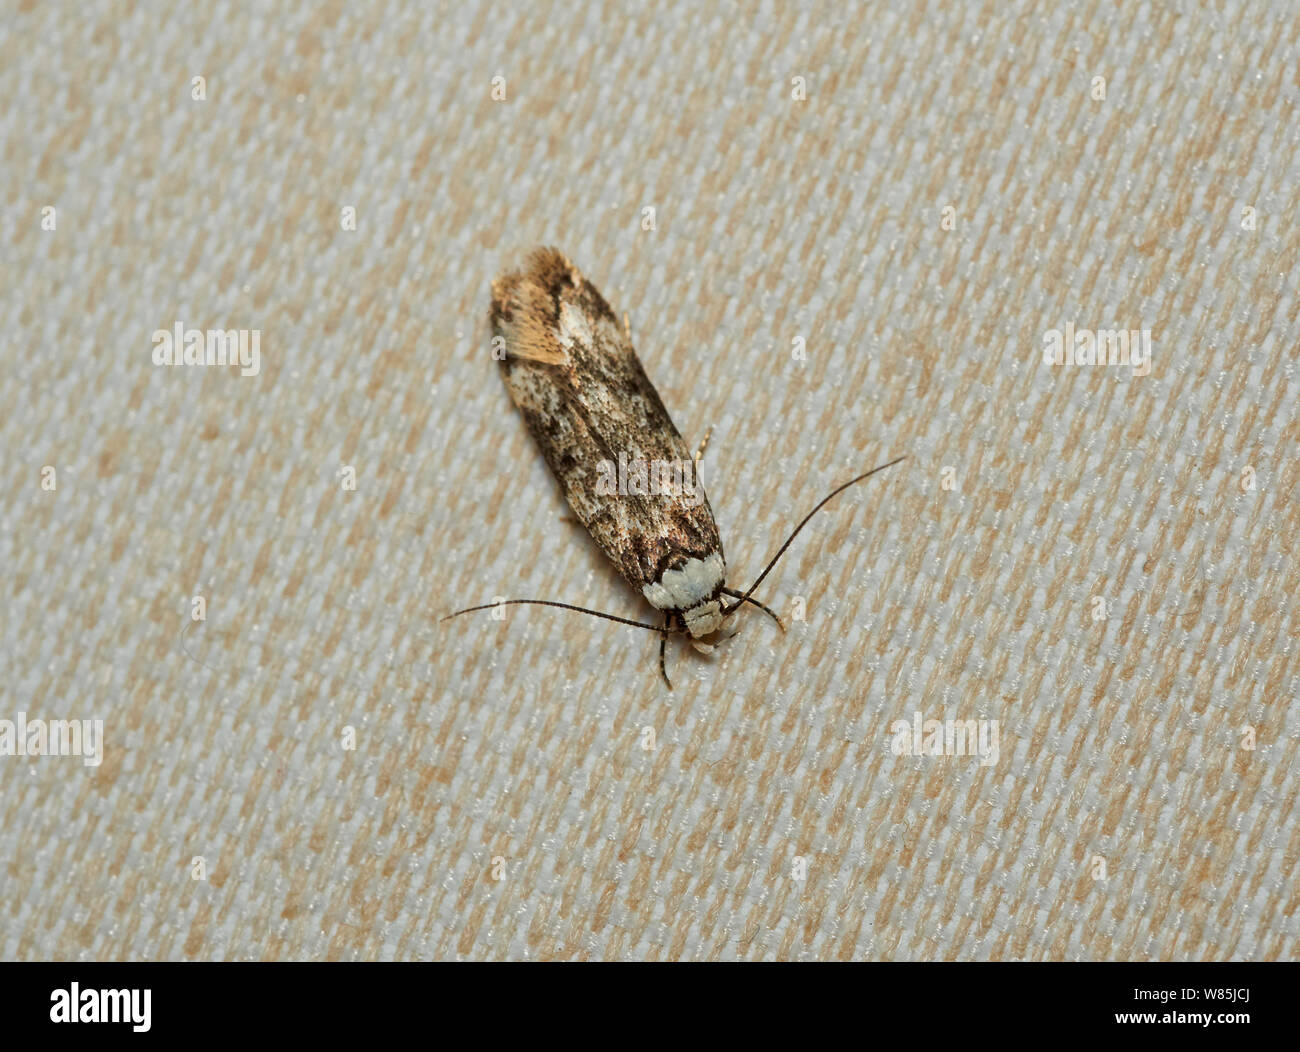 White-shouldered house moth (Endrosis sarcitrella) on fabric. Sussex, England, UK. September. Stock Photo